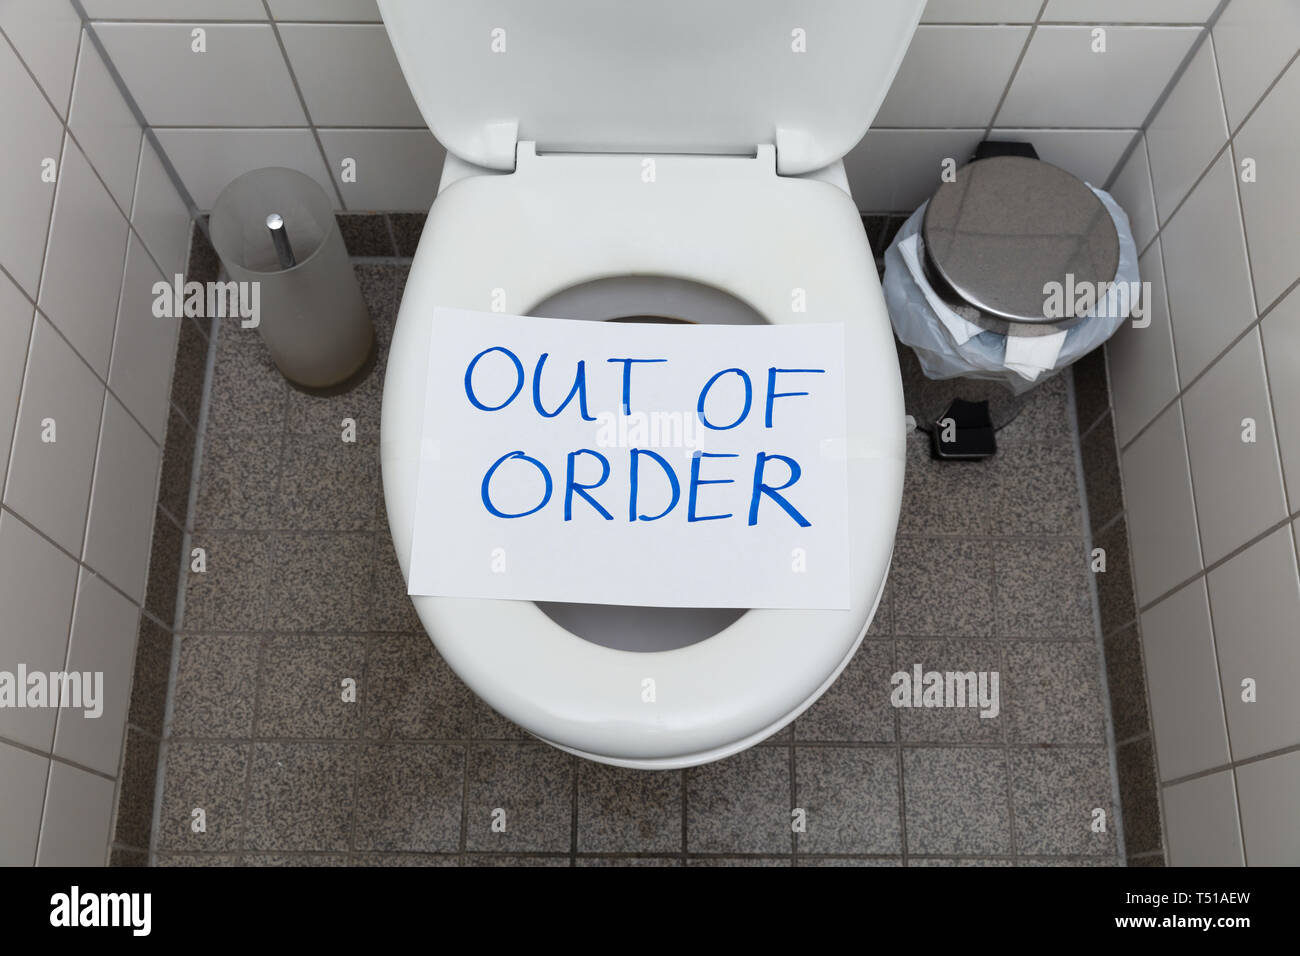 Written Text Out Of Order Message On Paper Over Toilet Bowl In Bathroom Stock Photo